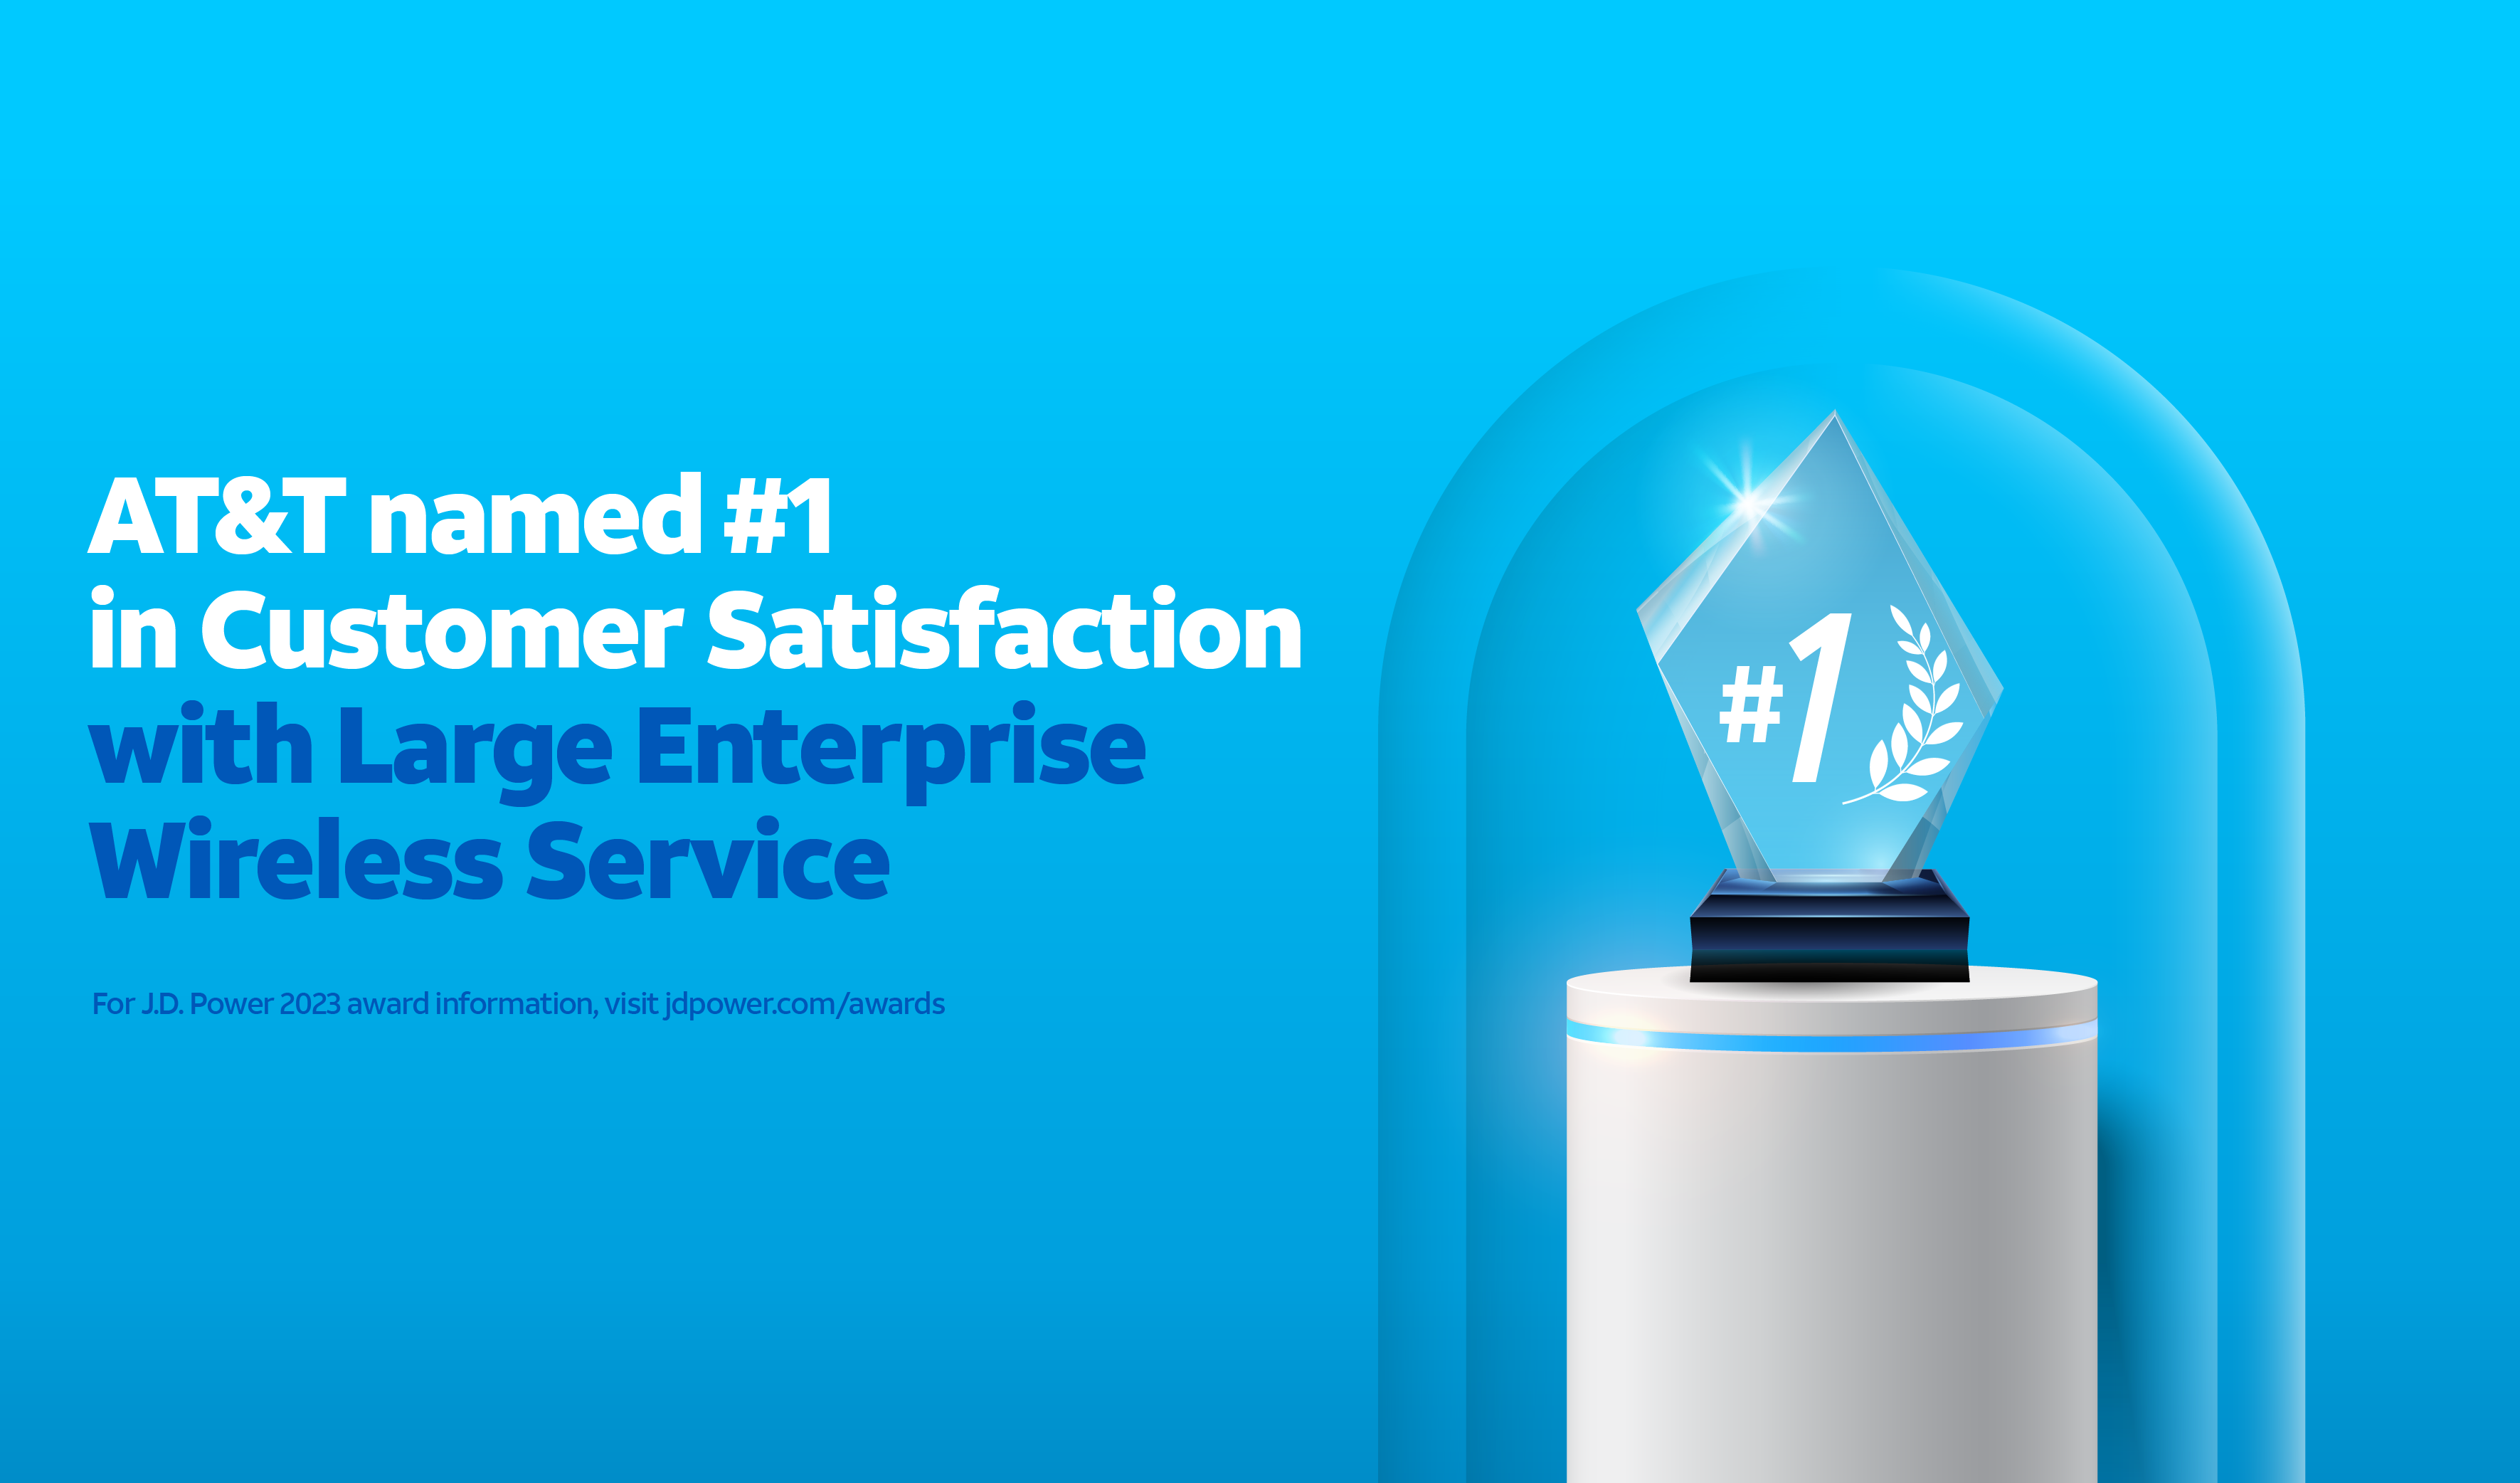 AT&T named #1 in Customer Satisfaction with Large Enterprise Wireless Service